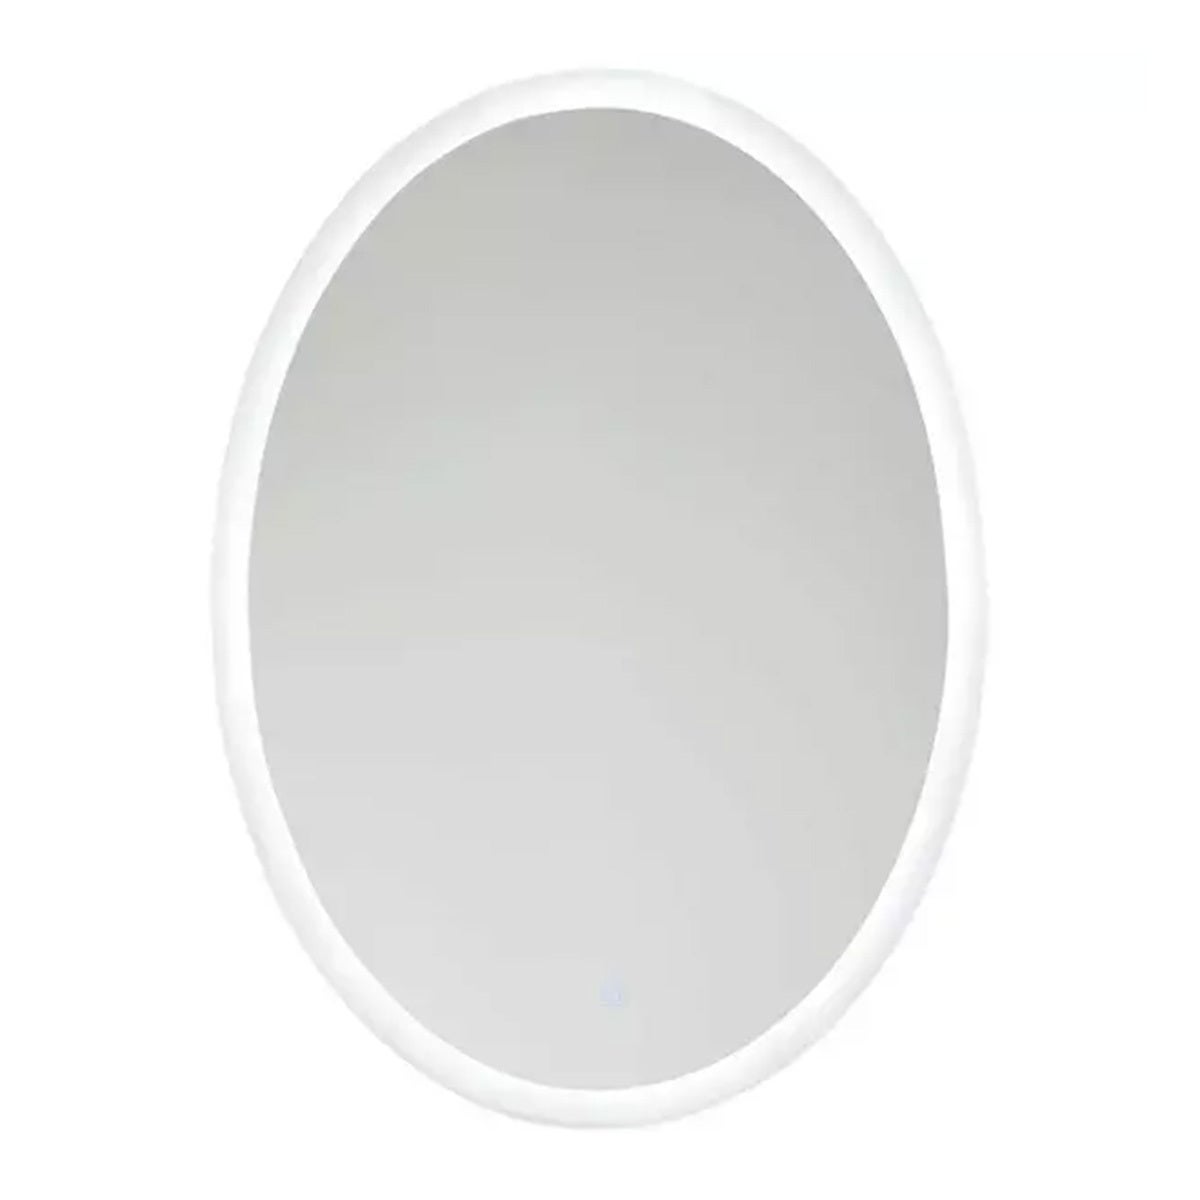 P6108 Oval LED Mirror by George Kovacs